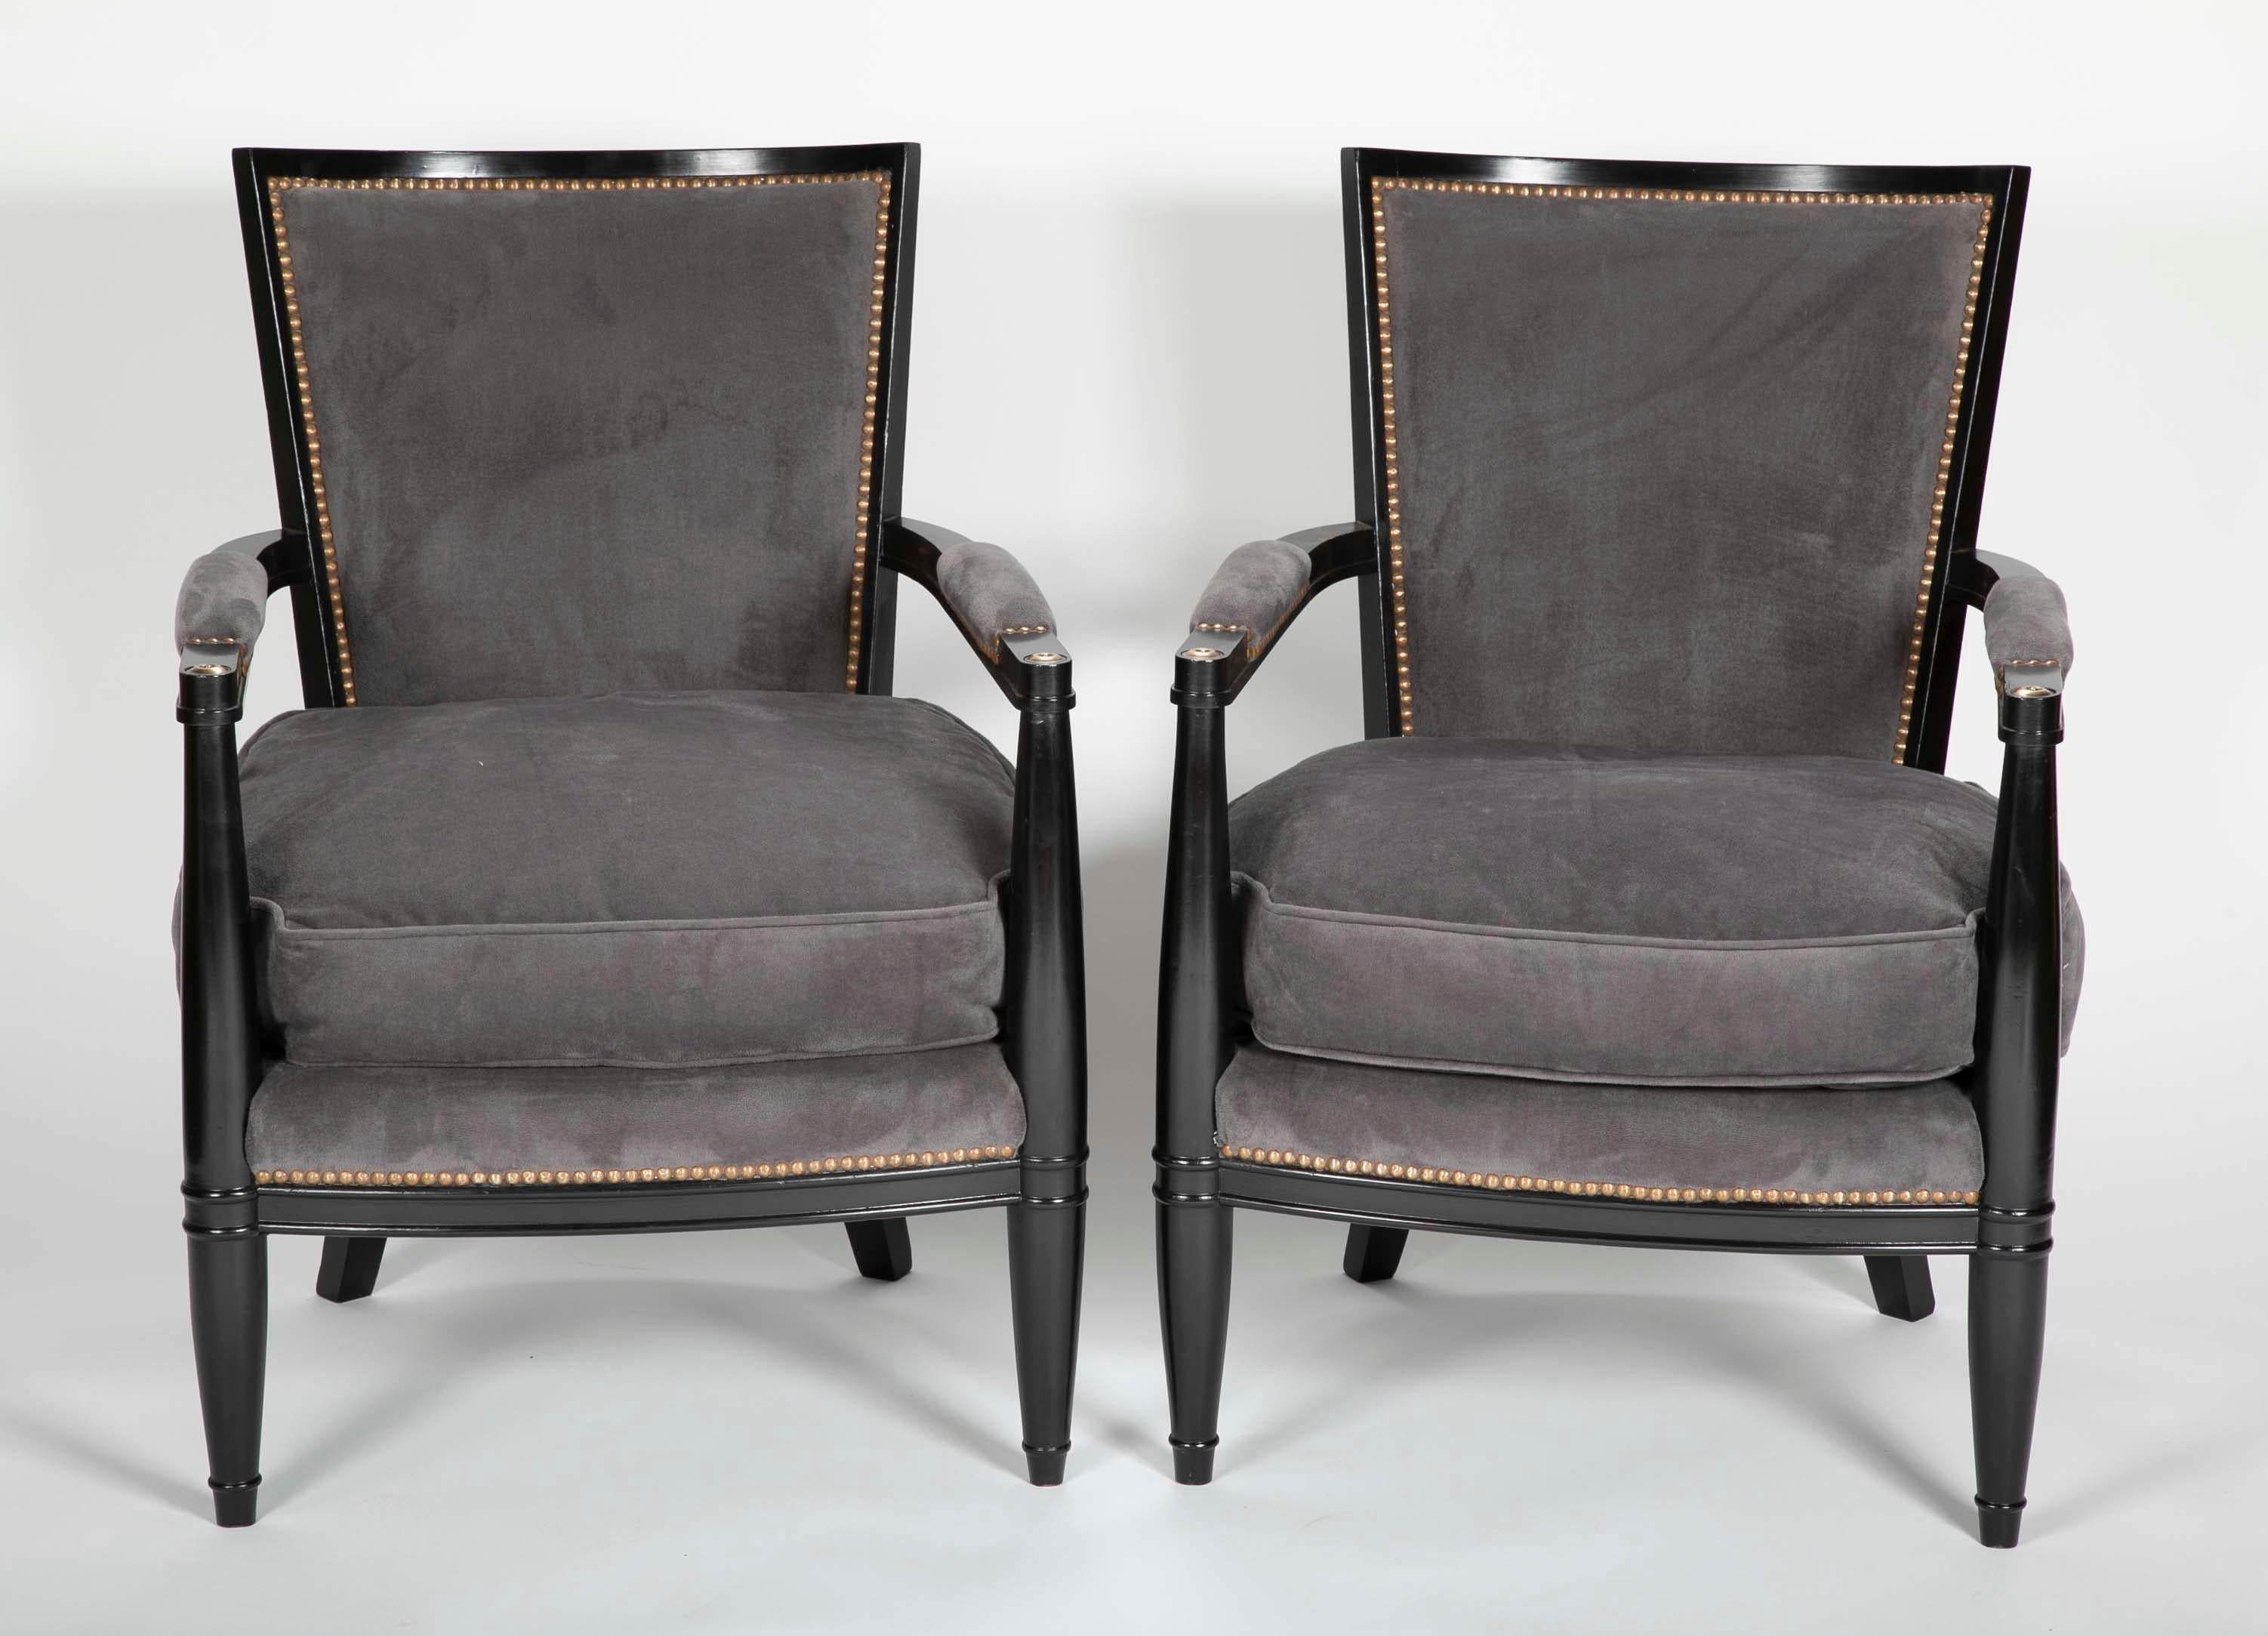 Pair of ebonized open armchairs French Directoire style in the manner of Andre Arbus. Upholstered back and seat cushion. Measure: Seat height 17.5